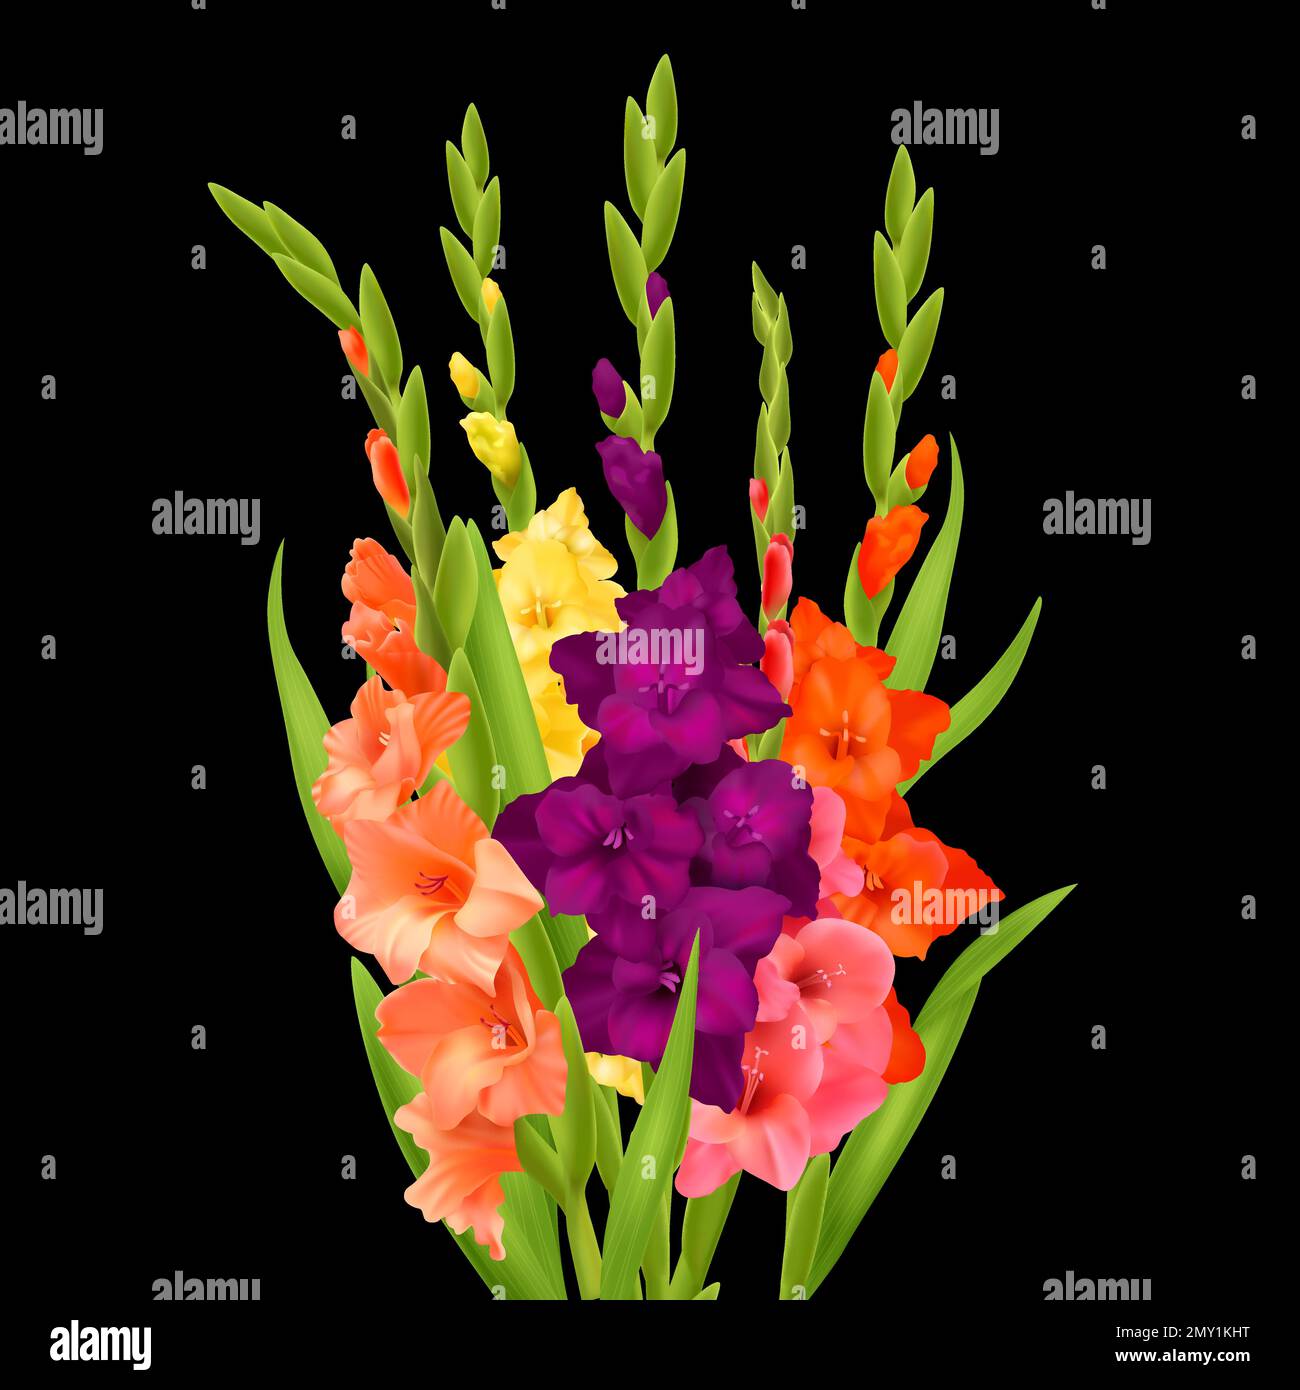 Realistic bunch of orange pink yellow and purple gladiolus flowers on black background vector illustration Stock Vector